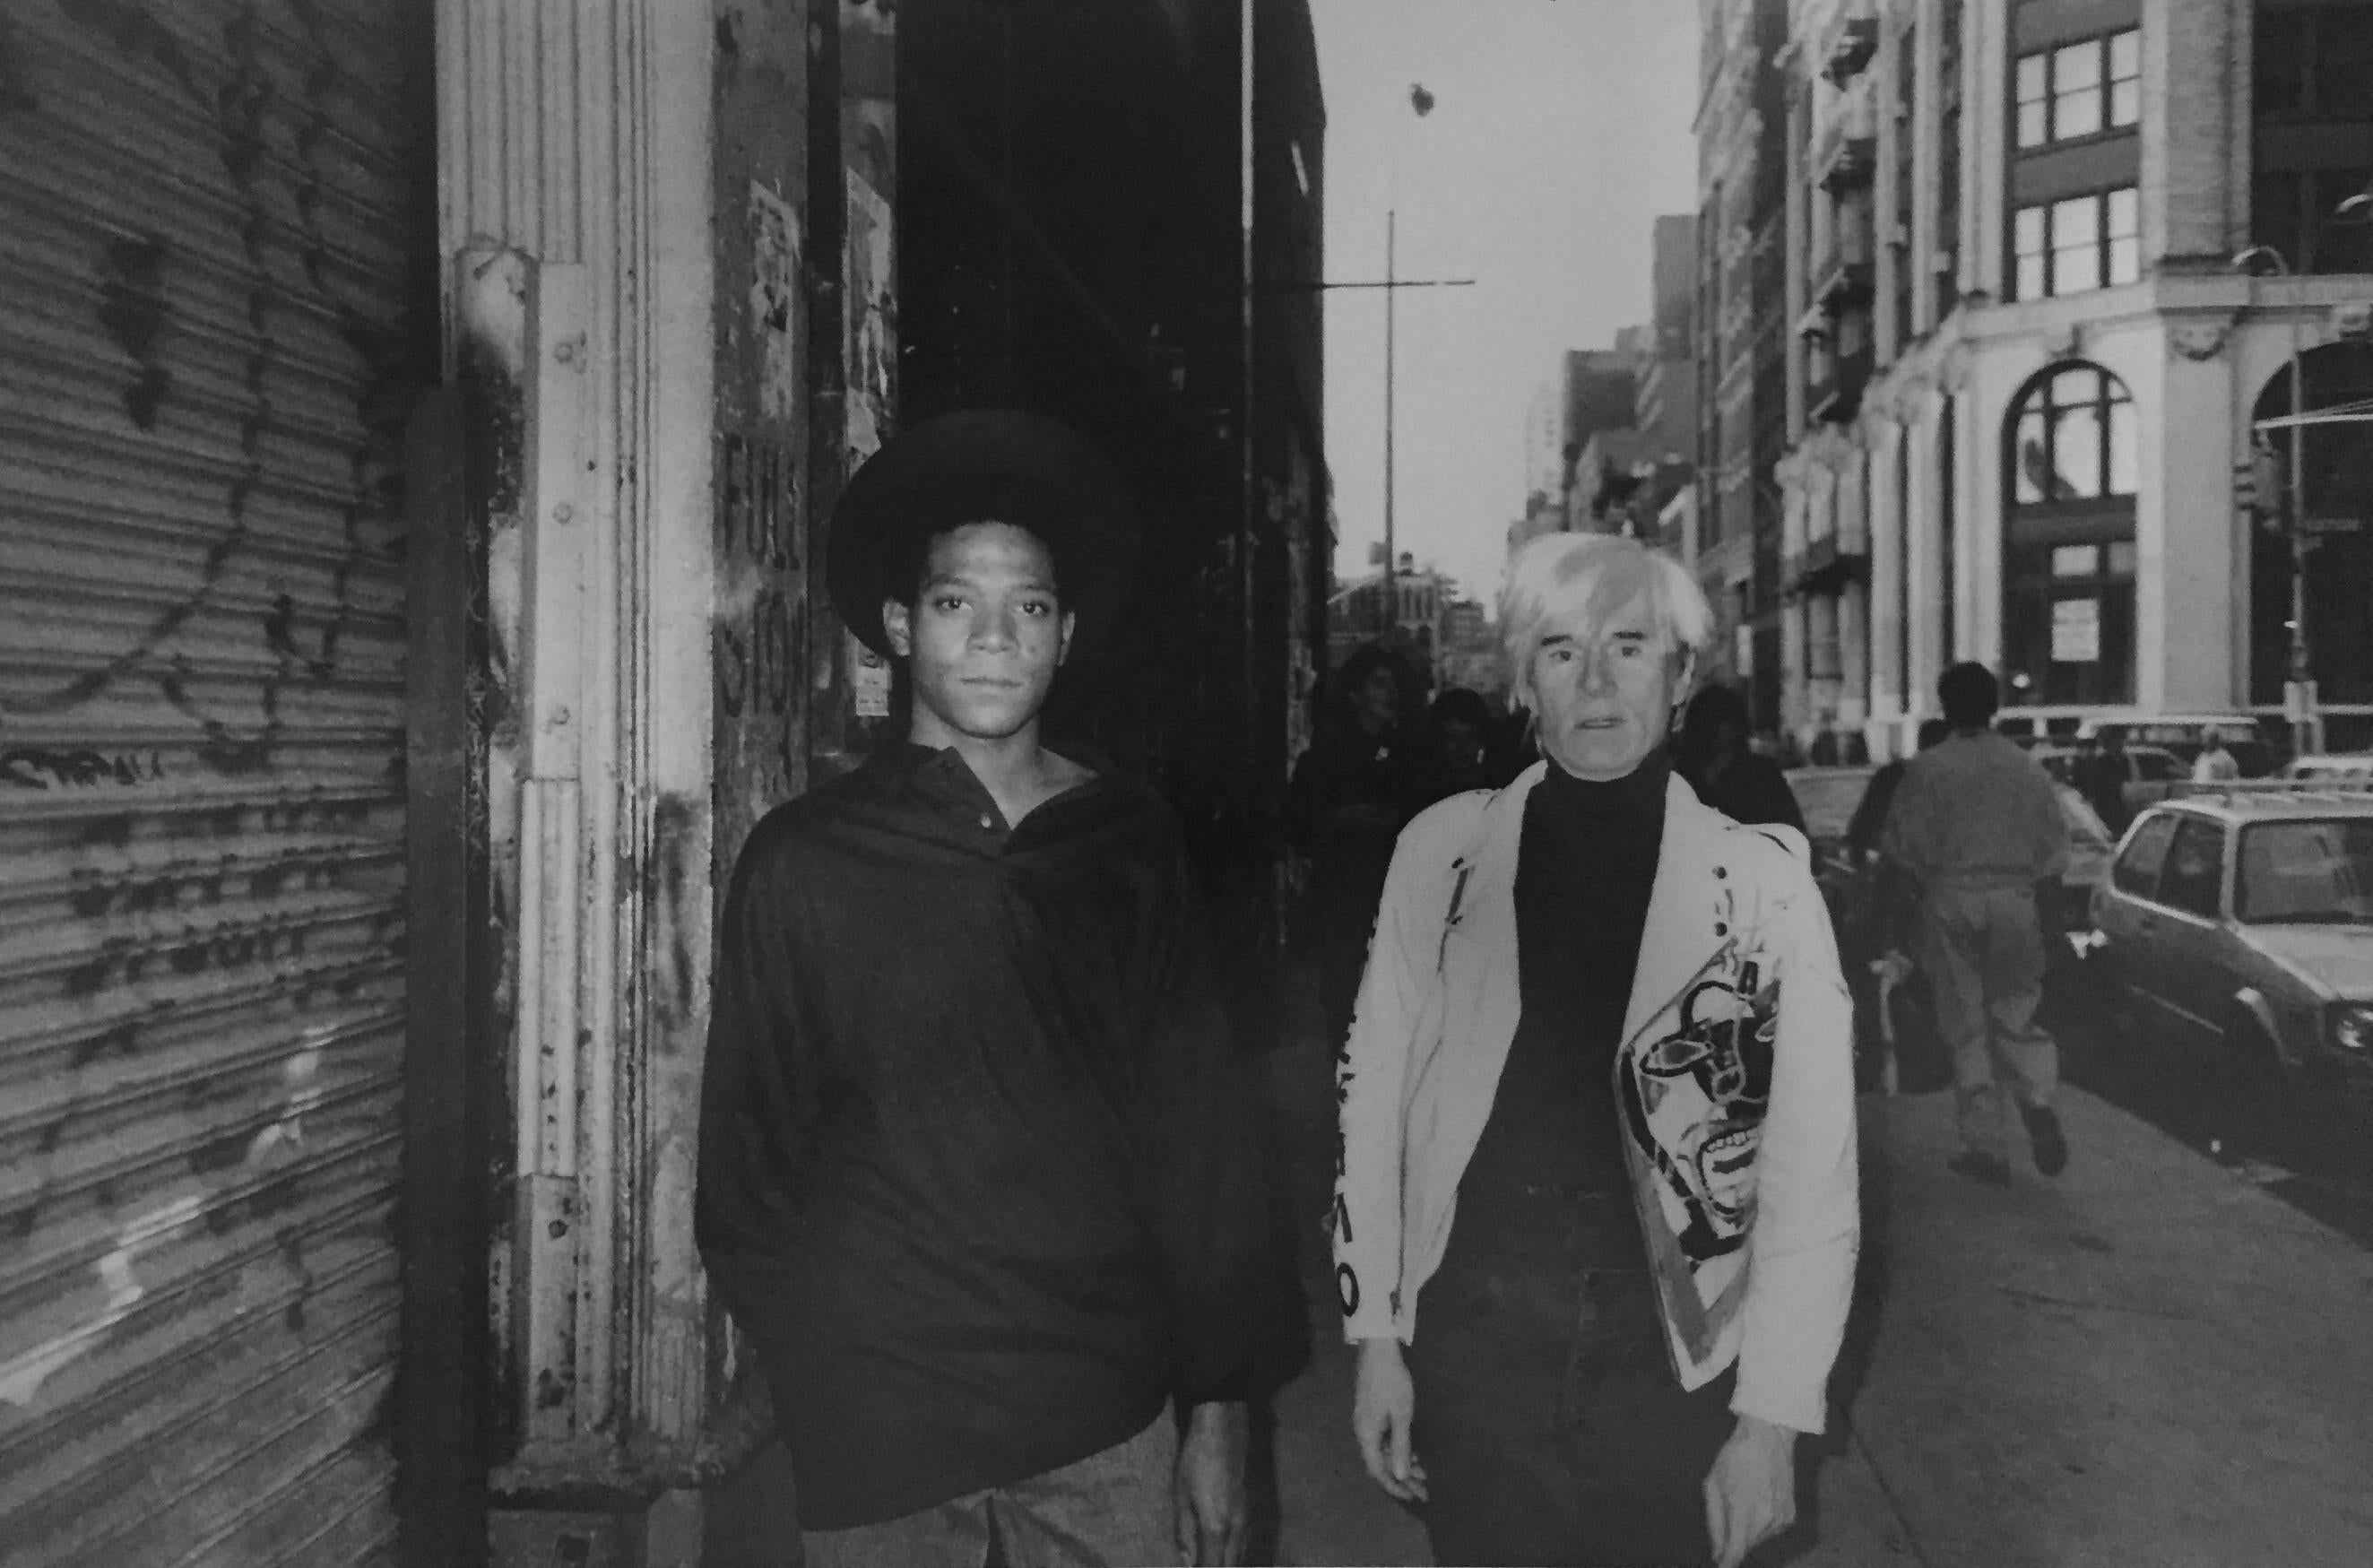 Ricky Powell Portrait Photograph - Andy Warhol and Jean-Michel Basquiat, Mercer Street, 1985 Edition 250